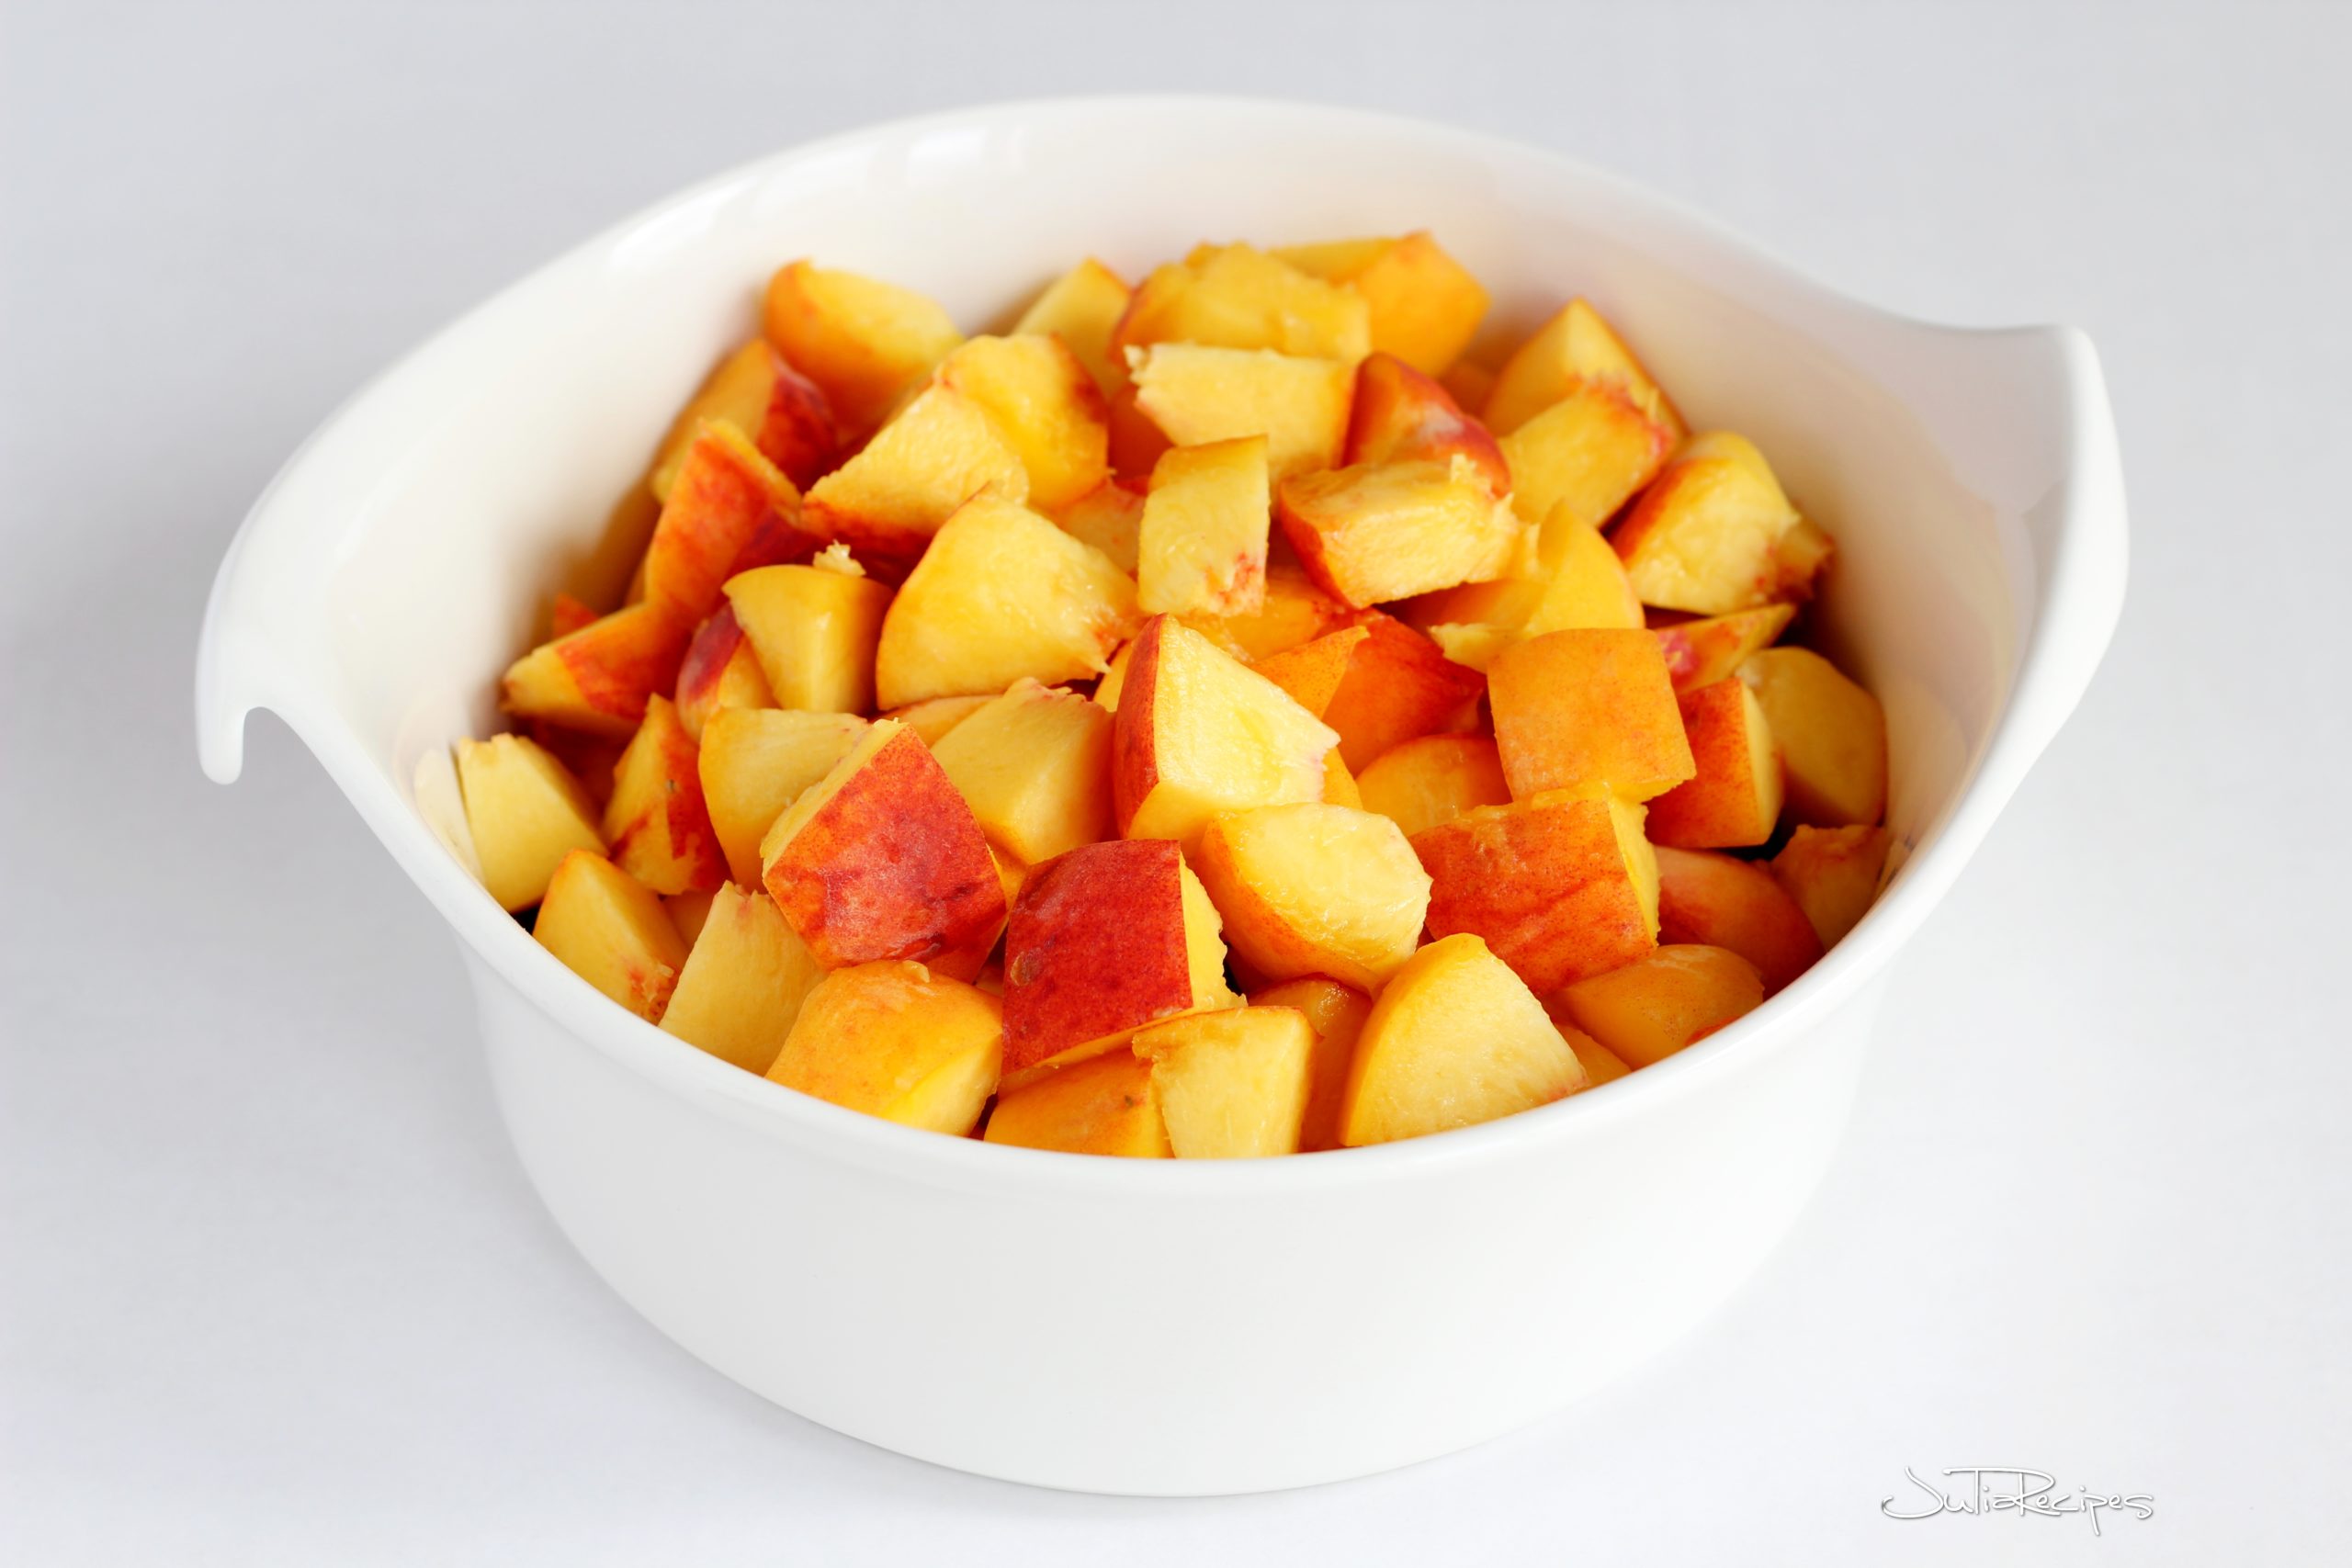 cubed peaches in white bowl